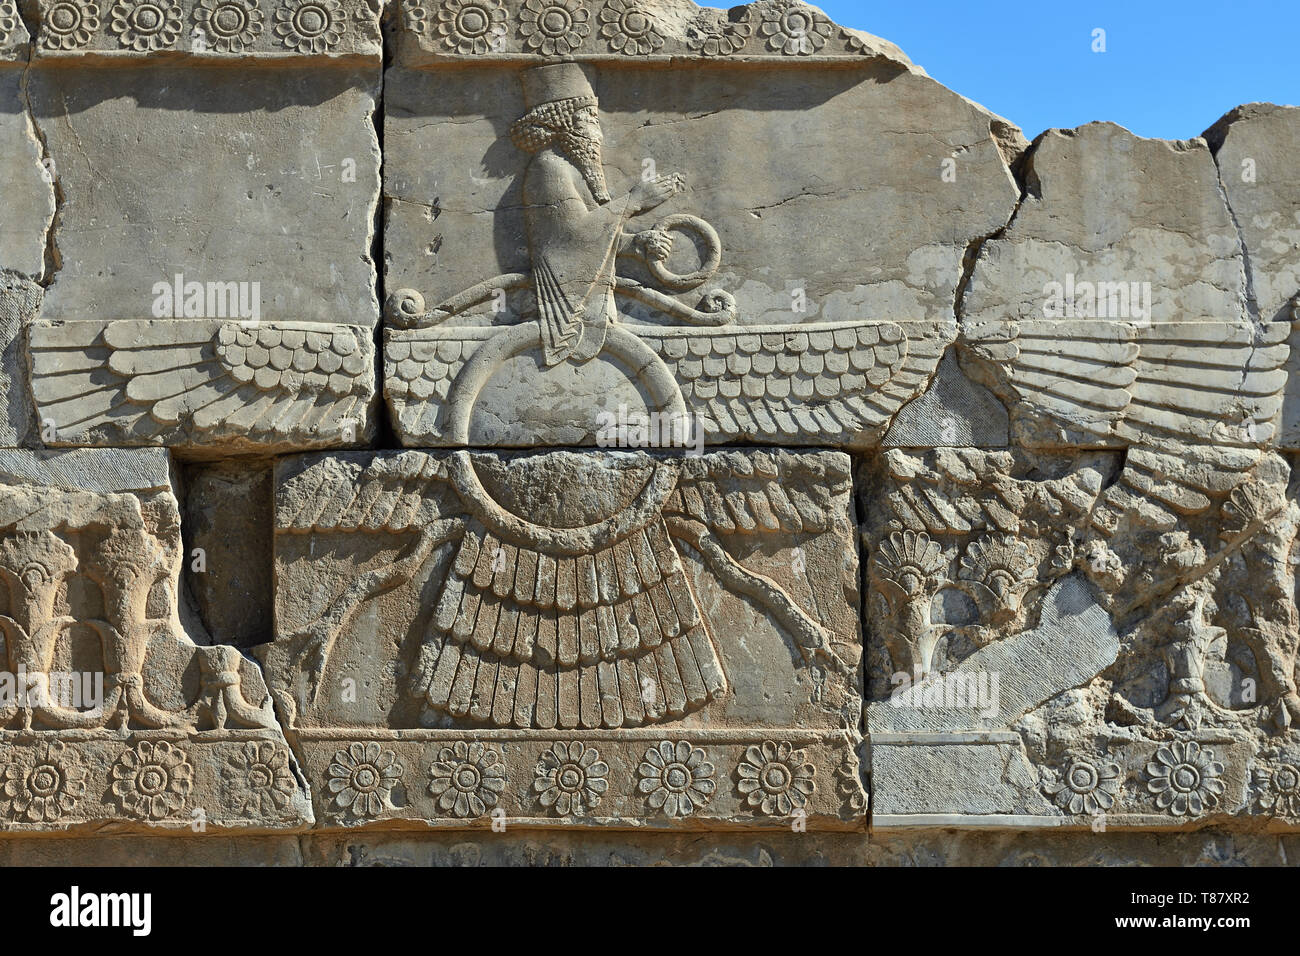 The beautiful reliefs - symbols of Zoroastrian in the ruins of Ancient Persepolis Complex of Near Eastern civilisation with persian architecture, Pars Stock Photo